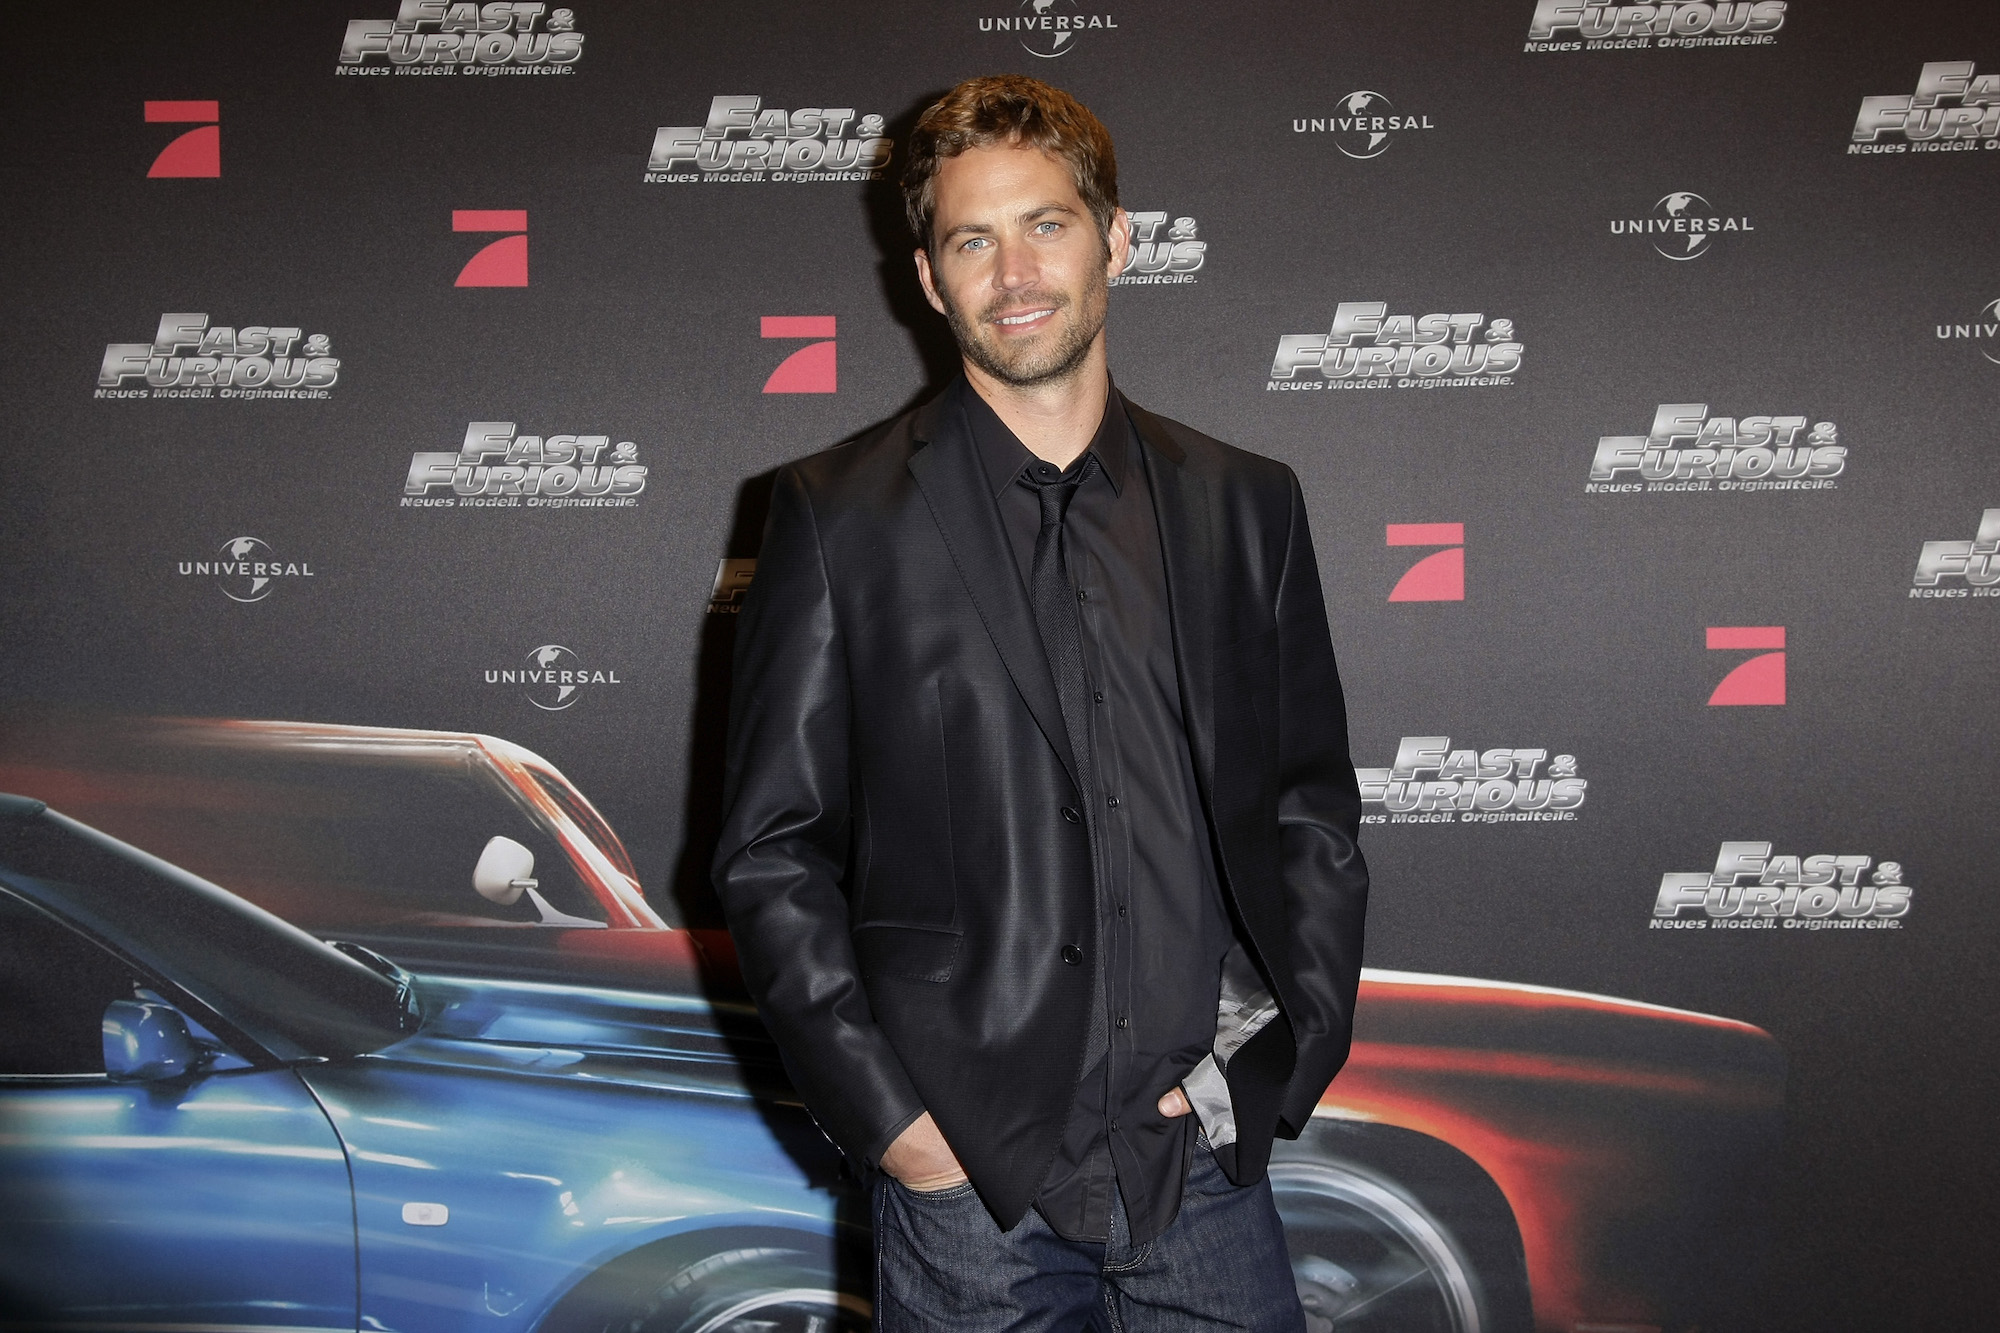 Paul Walker smiling at the camera in front of a dark background with repeating 'Fast and Furious' logos